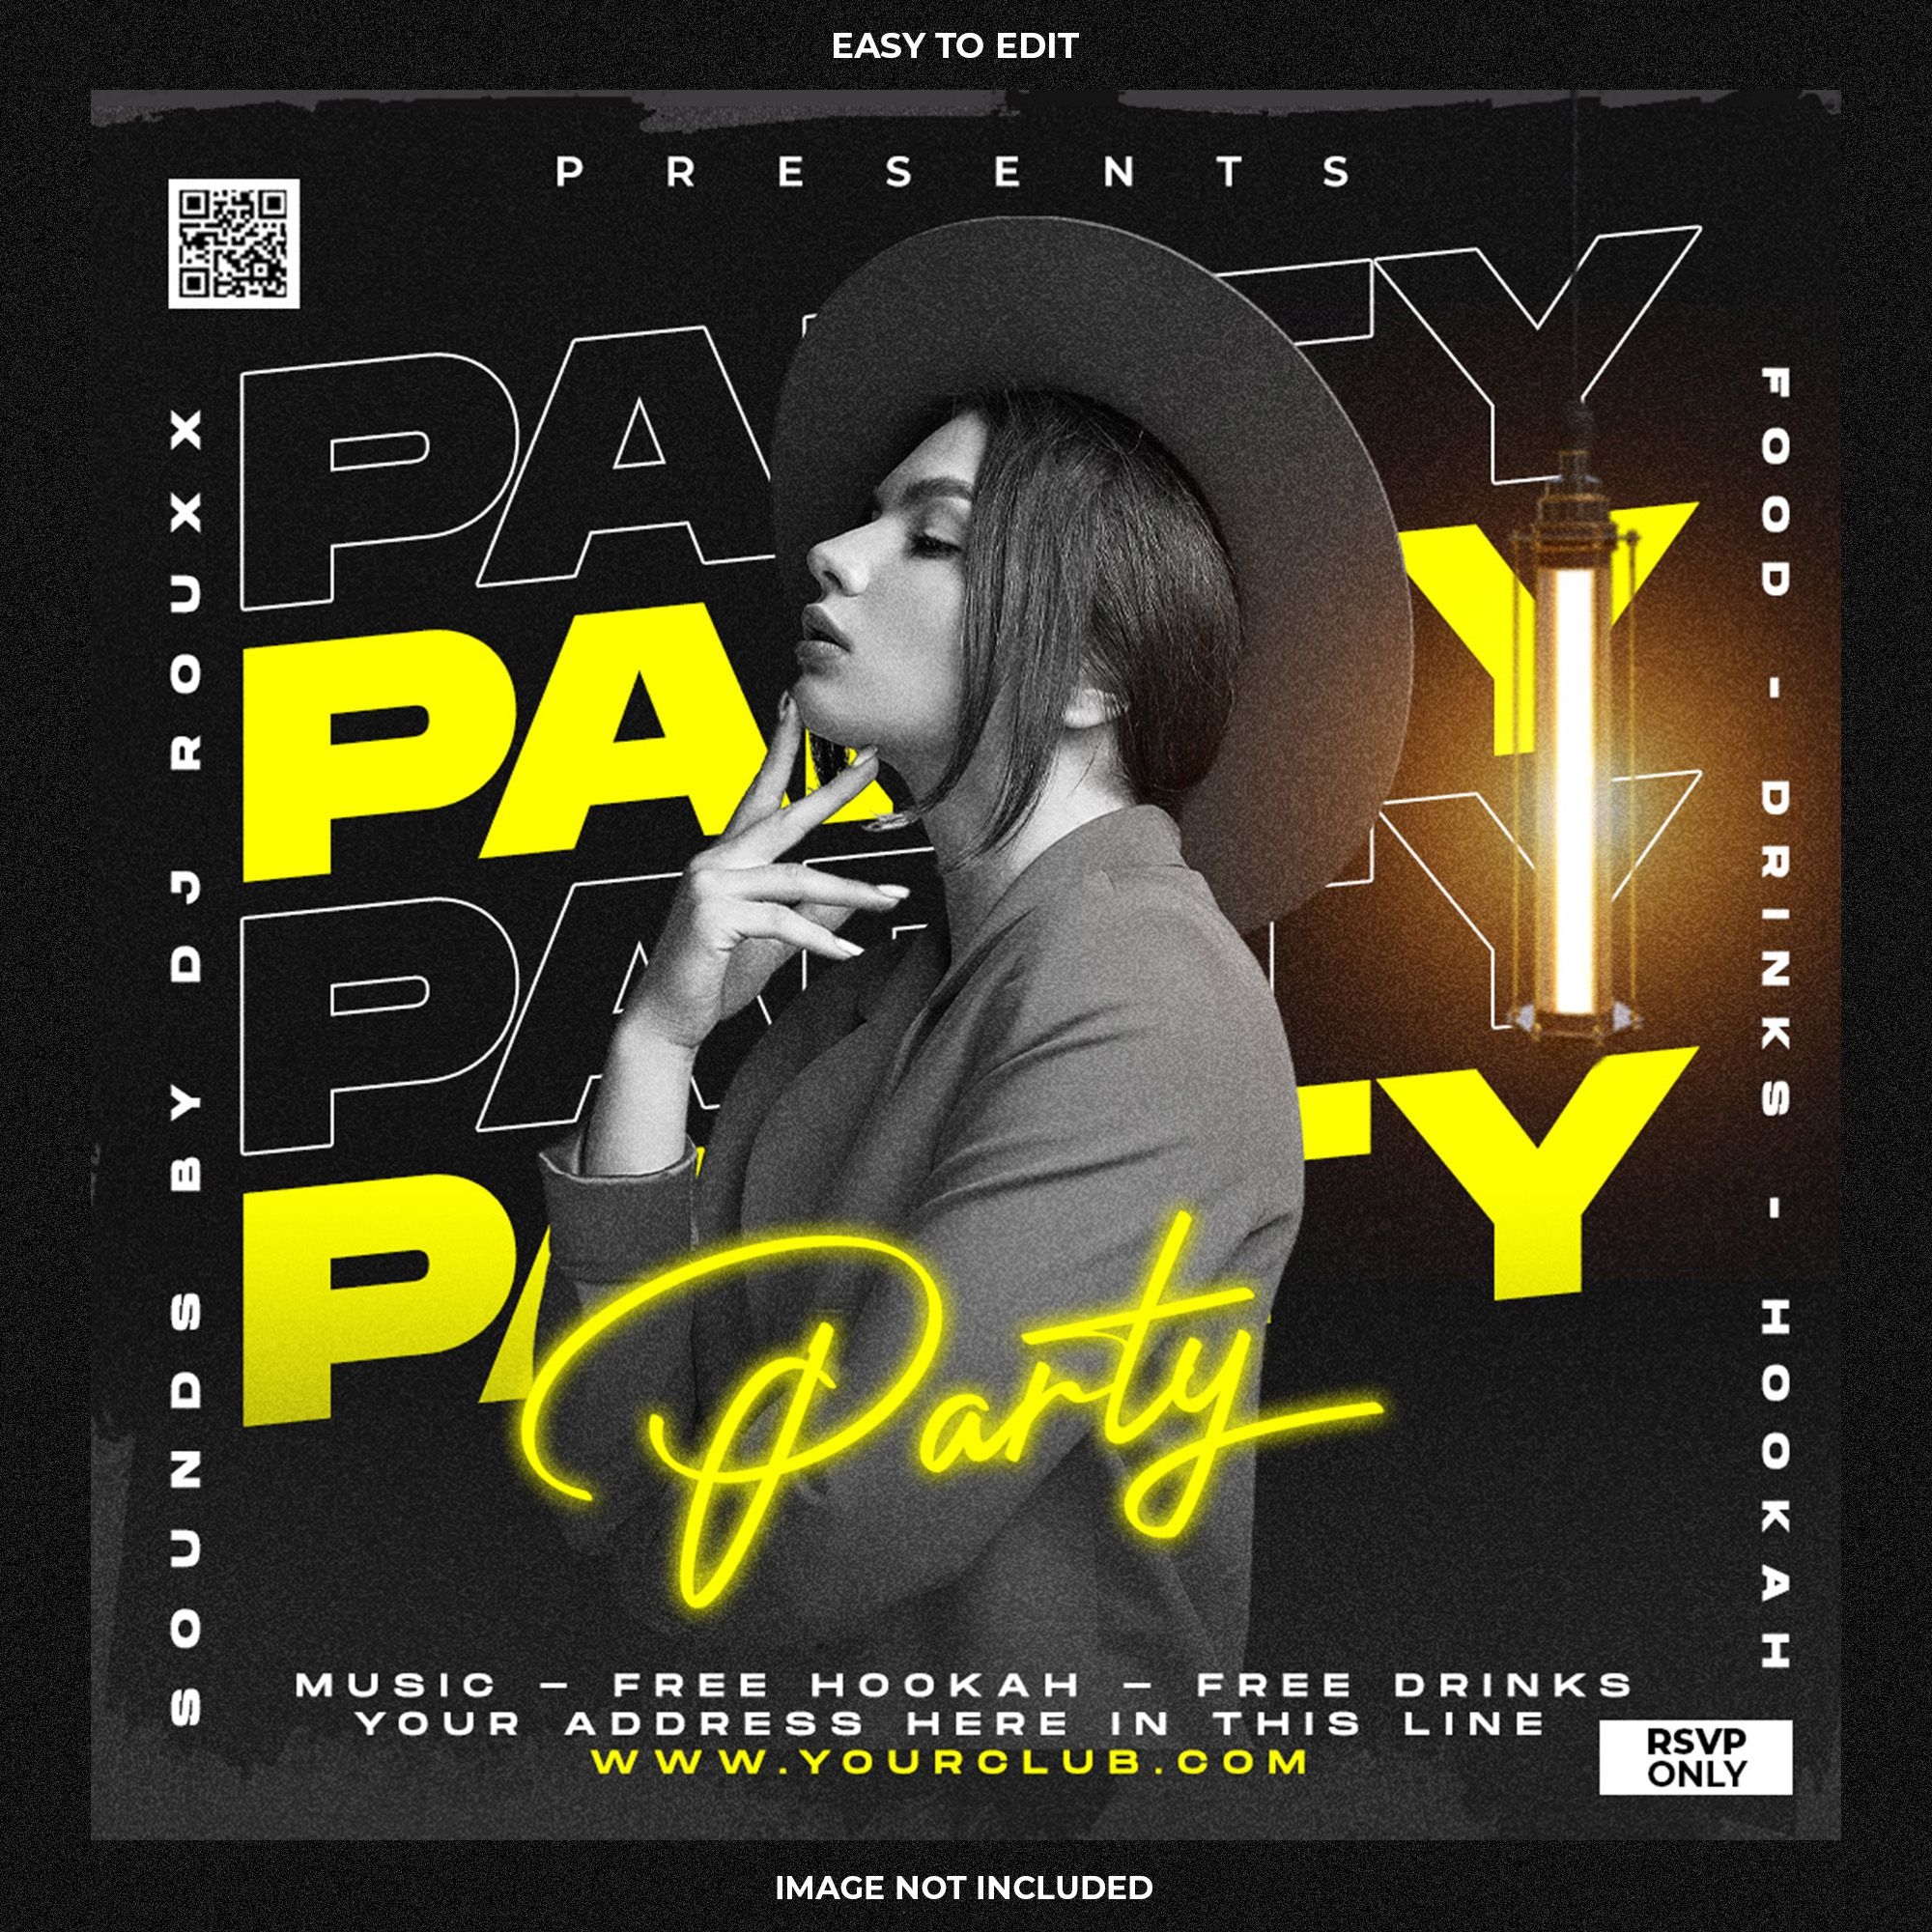 Club dj party flyer social media post and web banner